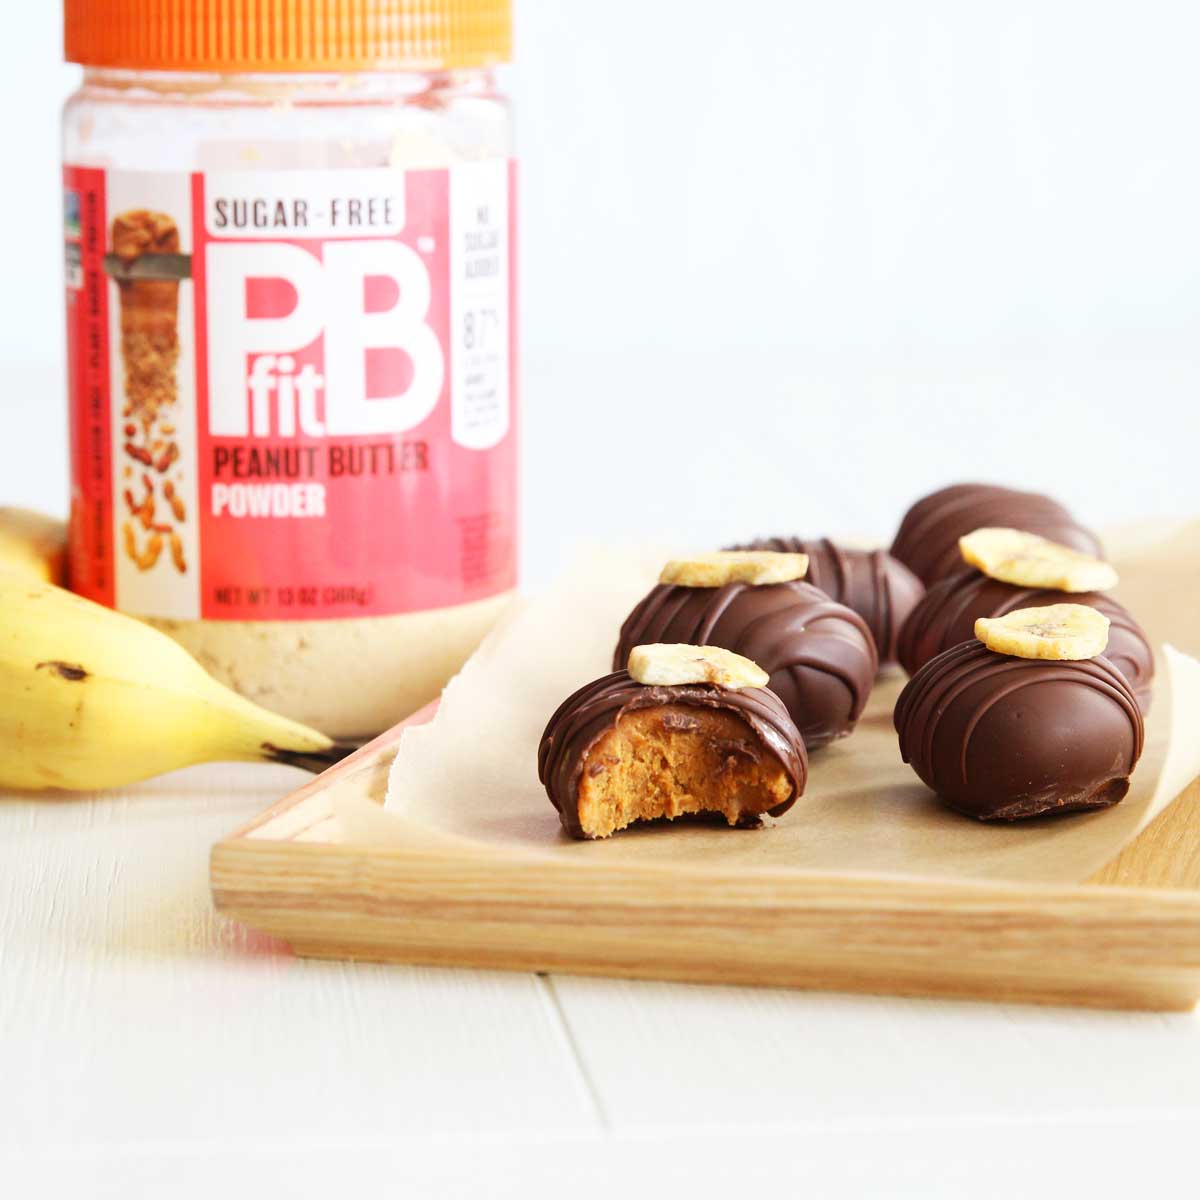 Easy & Delicious Banana Chocolate Easter Eggs Recipe with PB Fit - Only 3 Ingredients! - Sweet Taro Paste